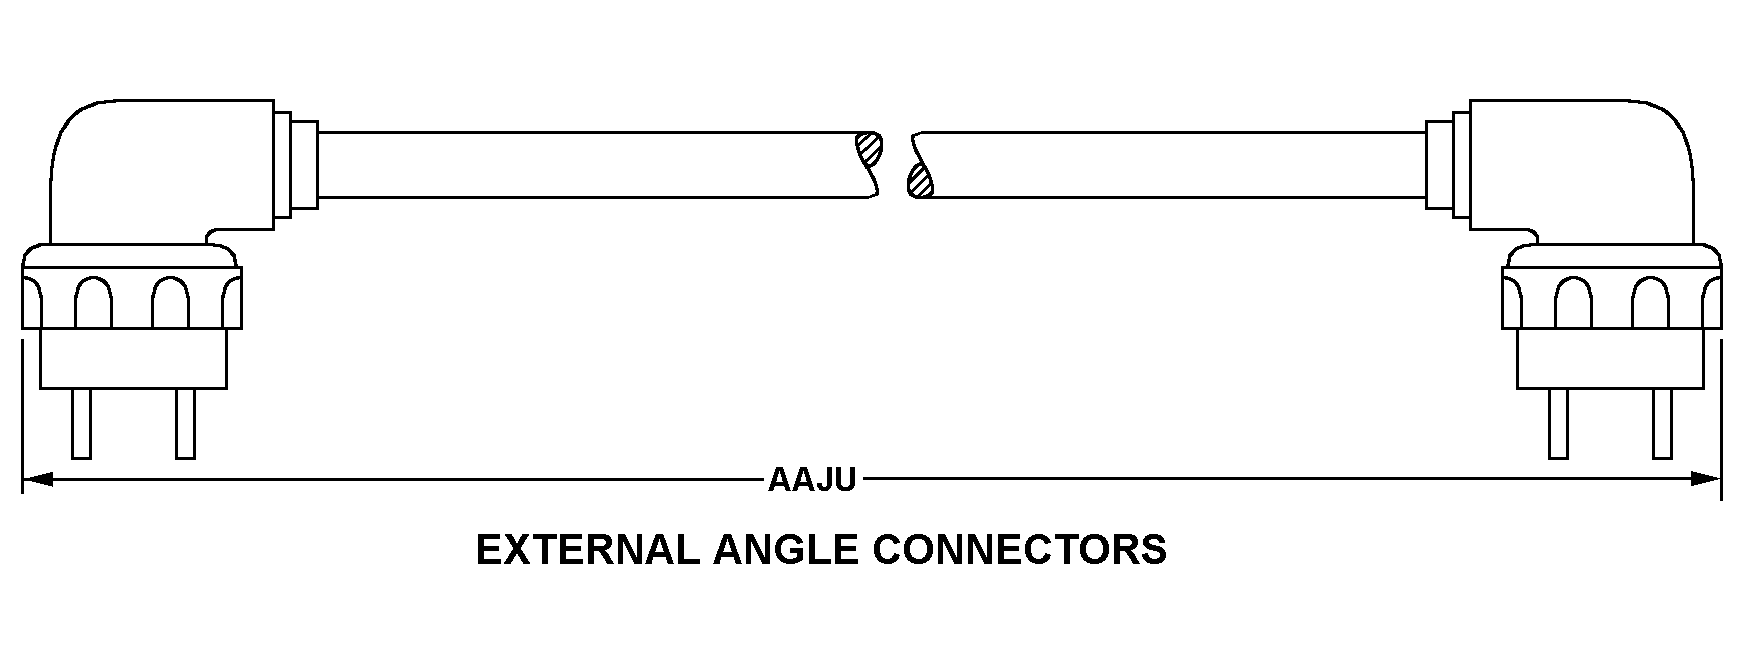 EXTERNAL ANGLE CONNECTORS style nsn 5995-01-333-6566